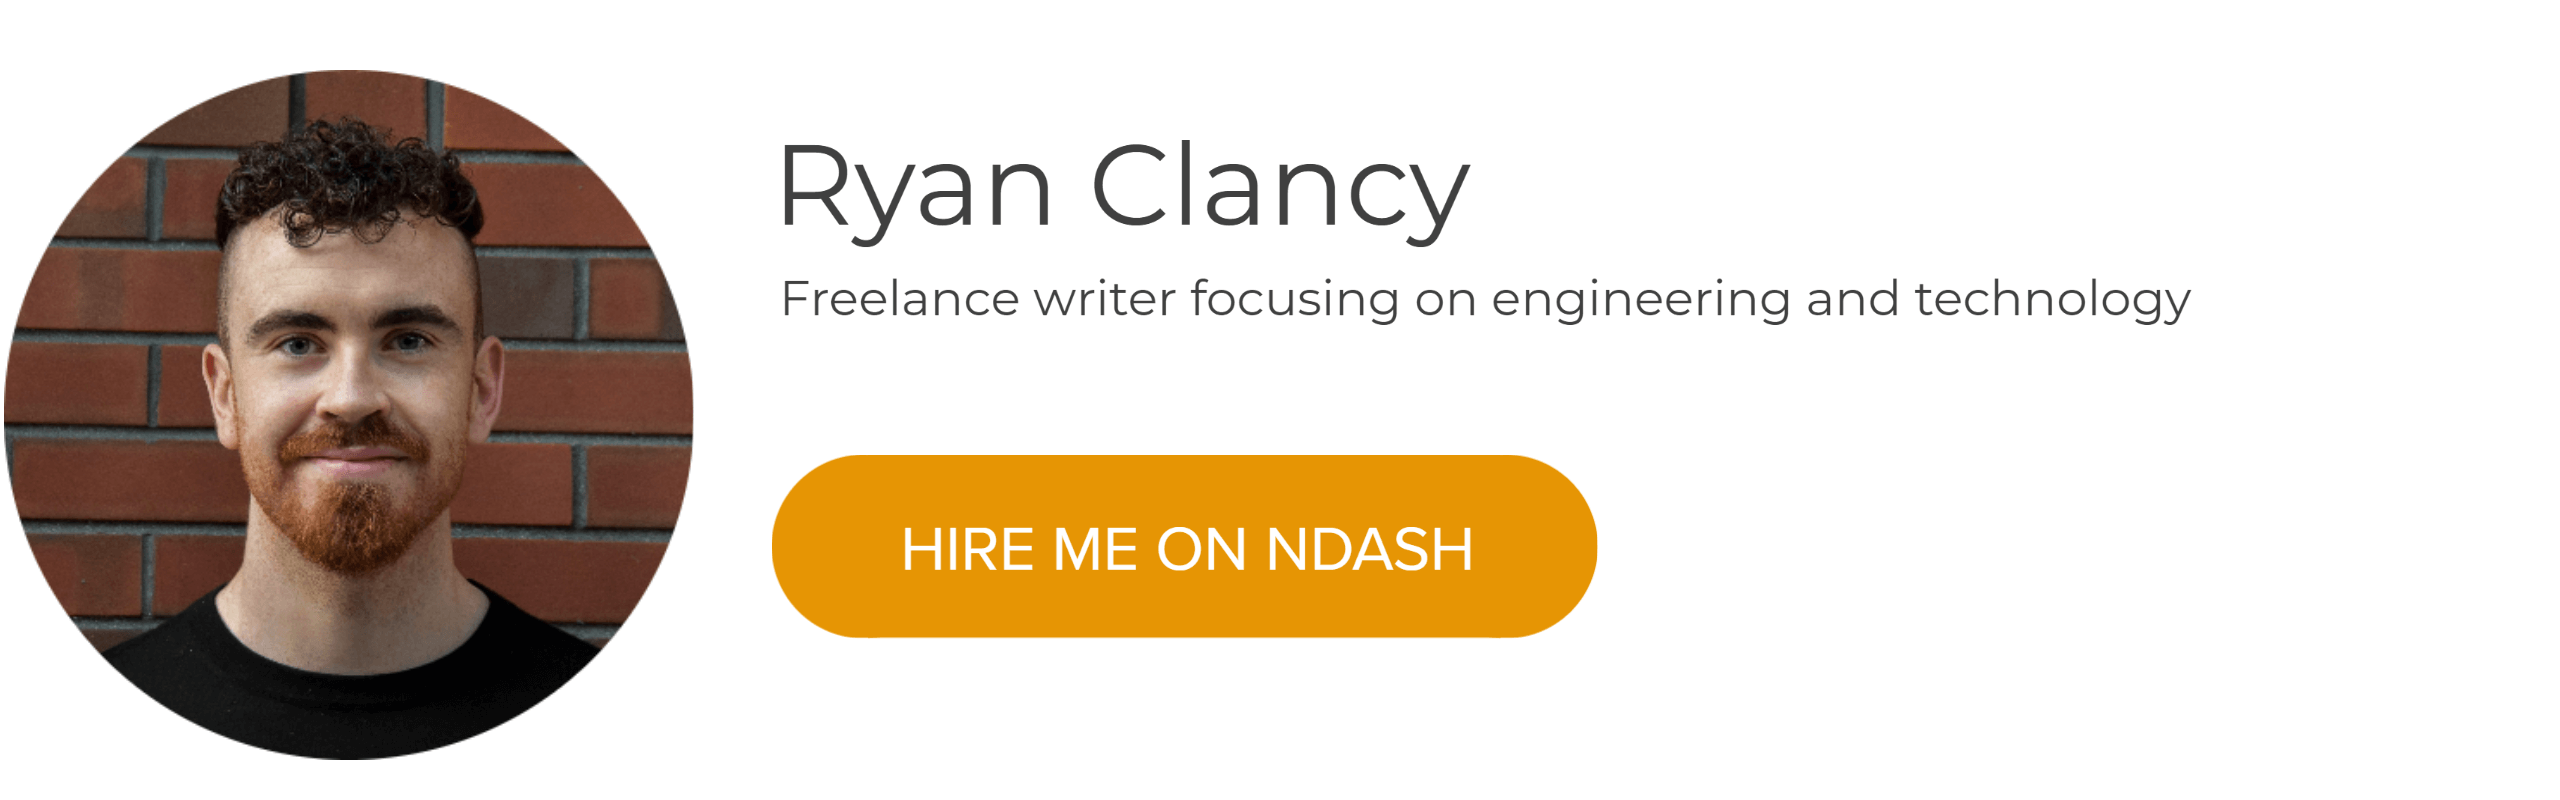 Ryan Clancy: Engineering and Technology Writer